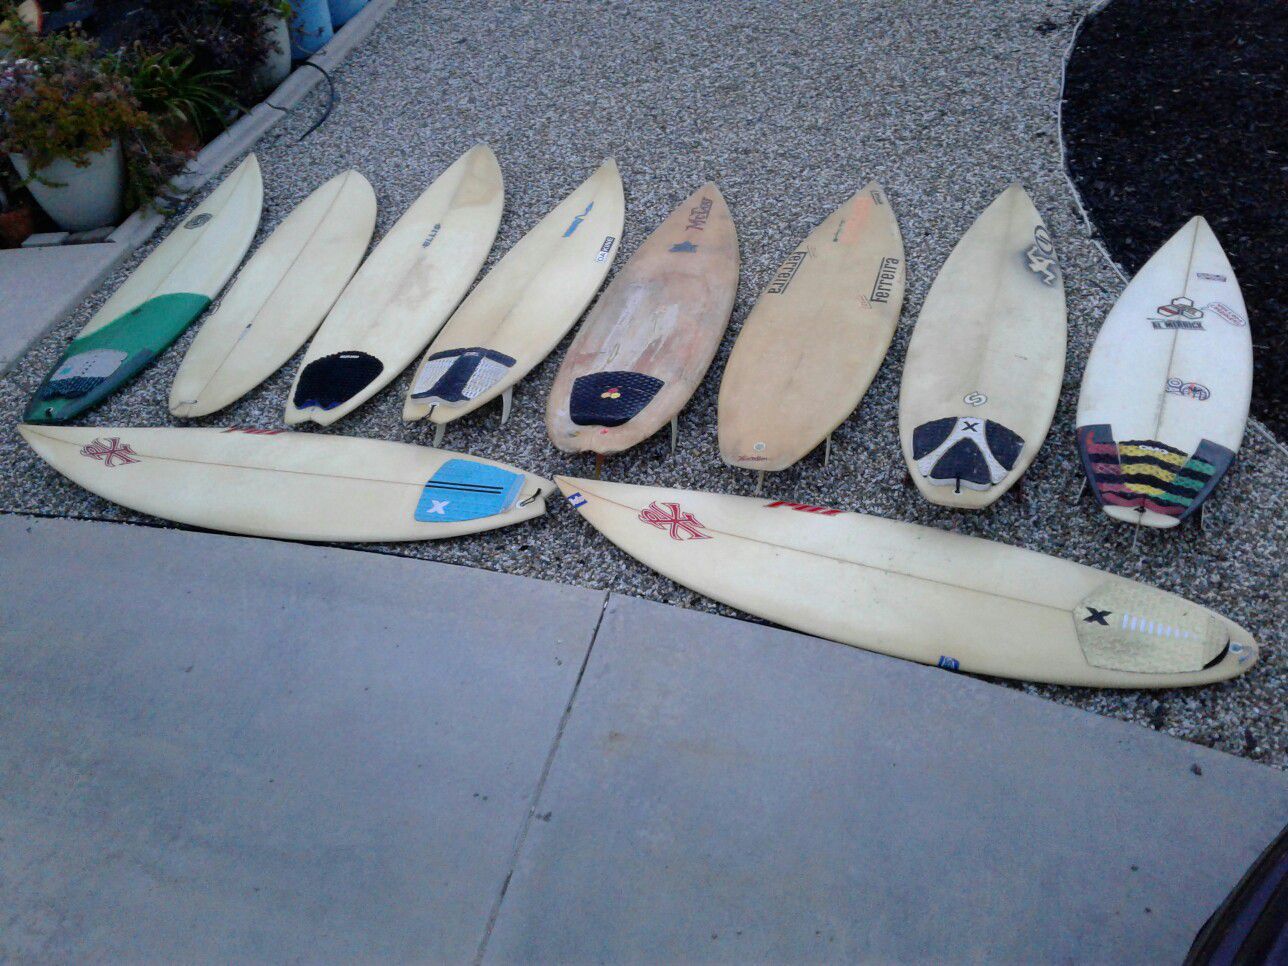 Shortboard Surfboard Sale 5'10" to 6'5" + More